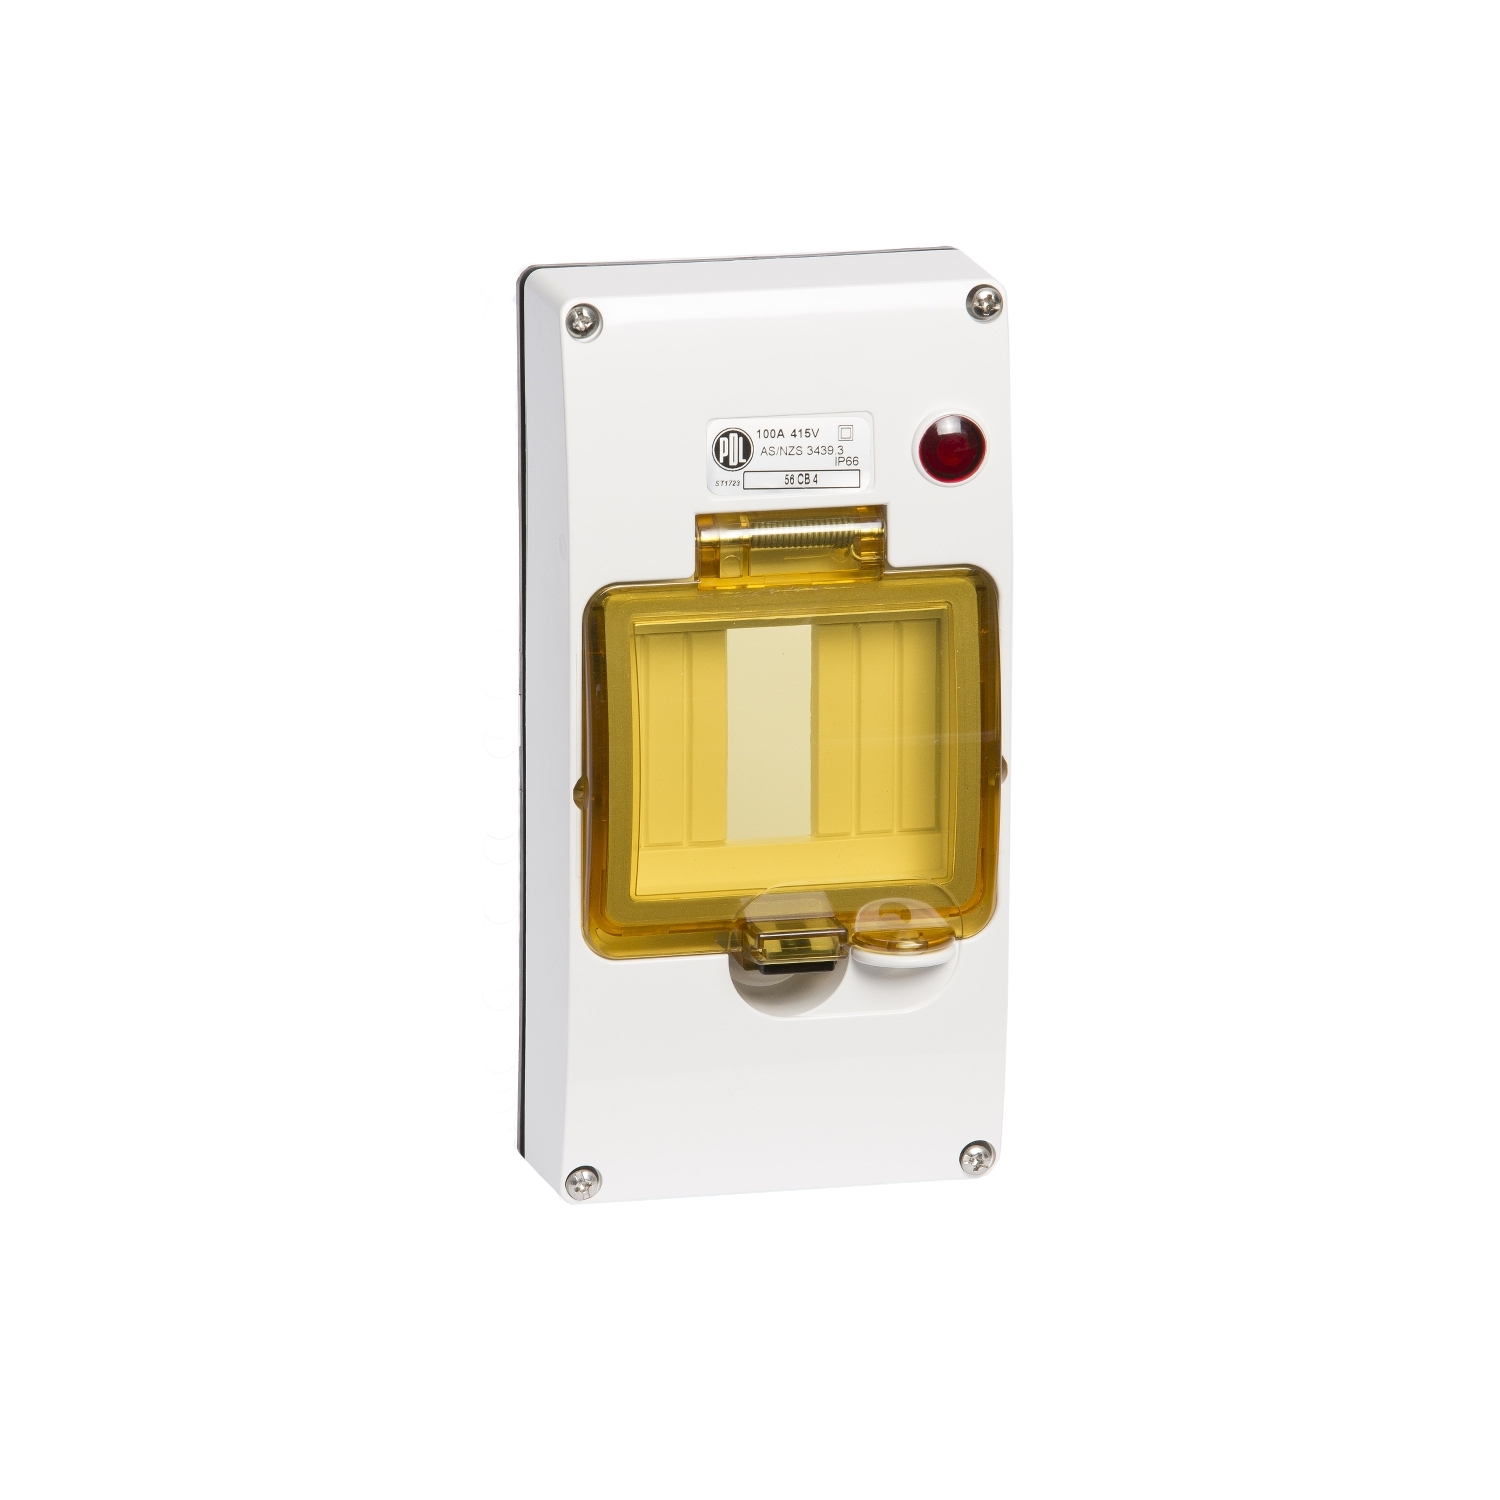 PDL 56 Series 4Way DIN Mounting MCB/RCD Cover - Includes DIN Rail IP66